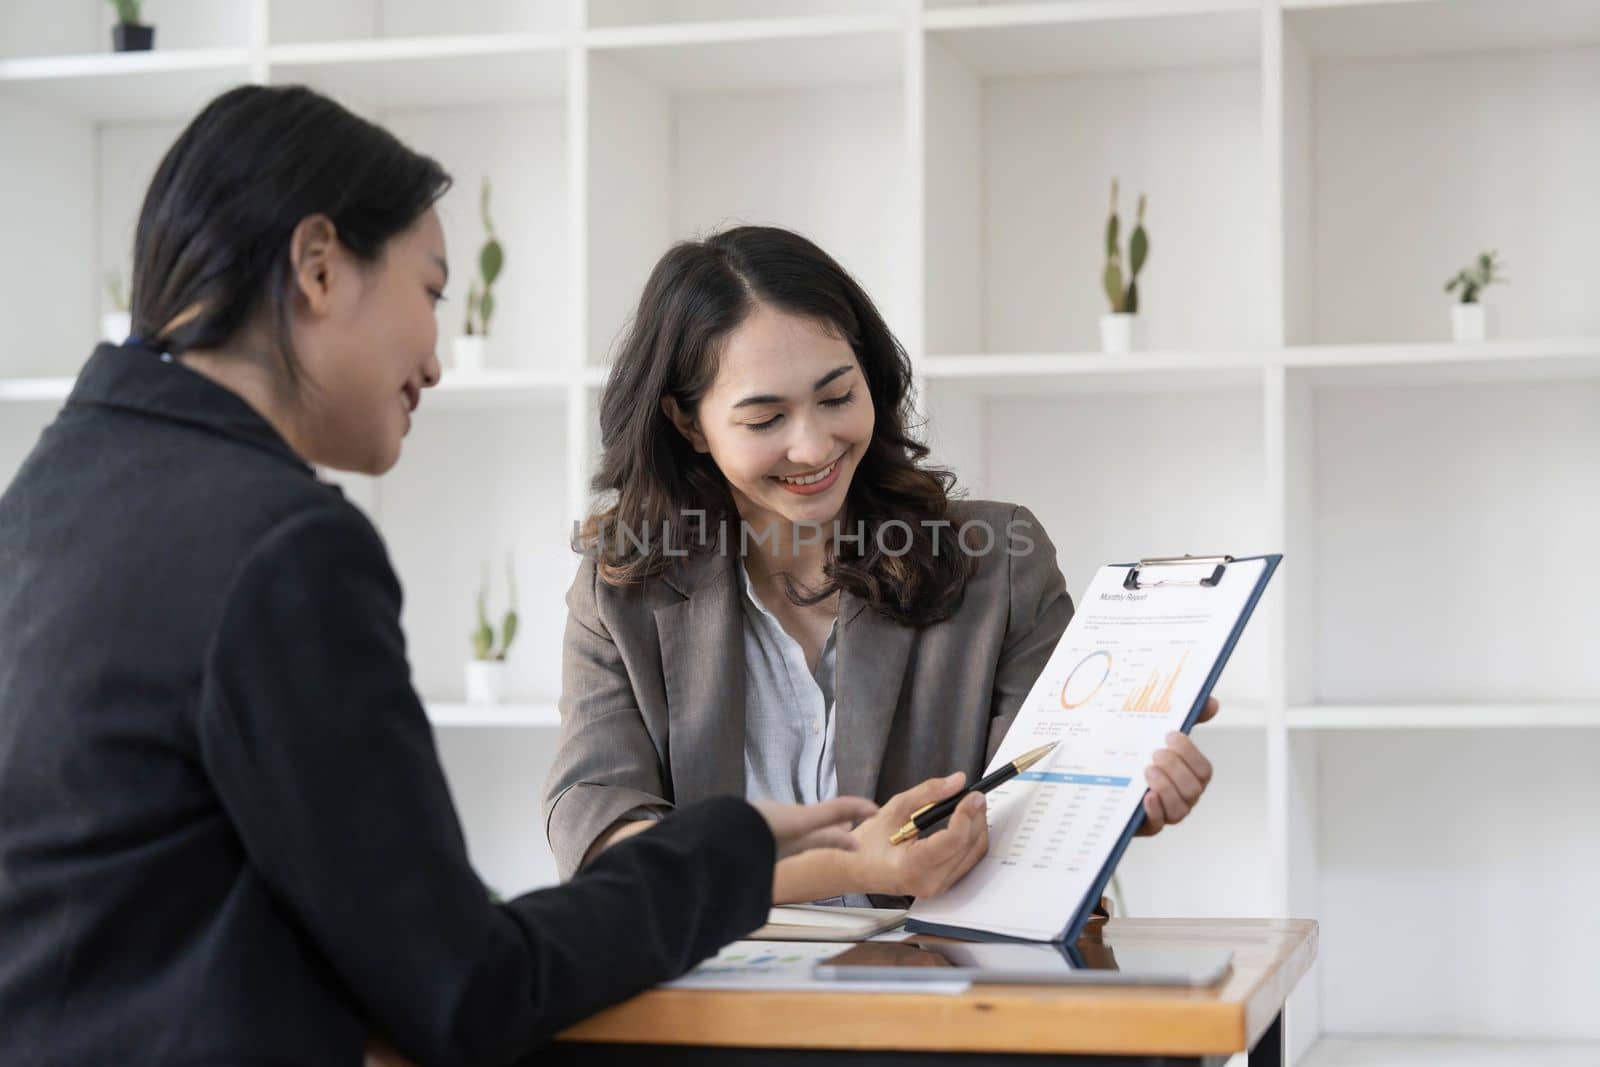 Two business leaders talk about charts, financial graphs showing results are analyzing and calculating planning strategies, business success building processes by wichayada